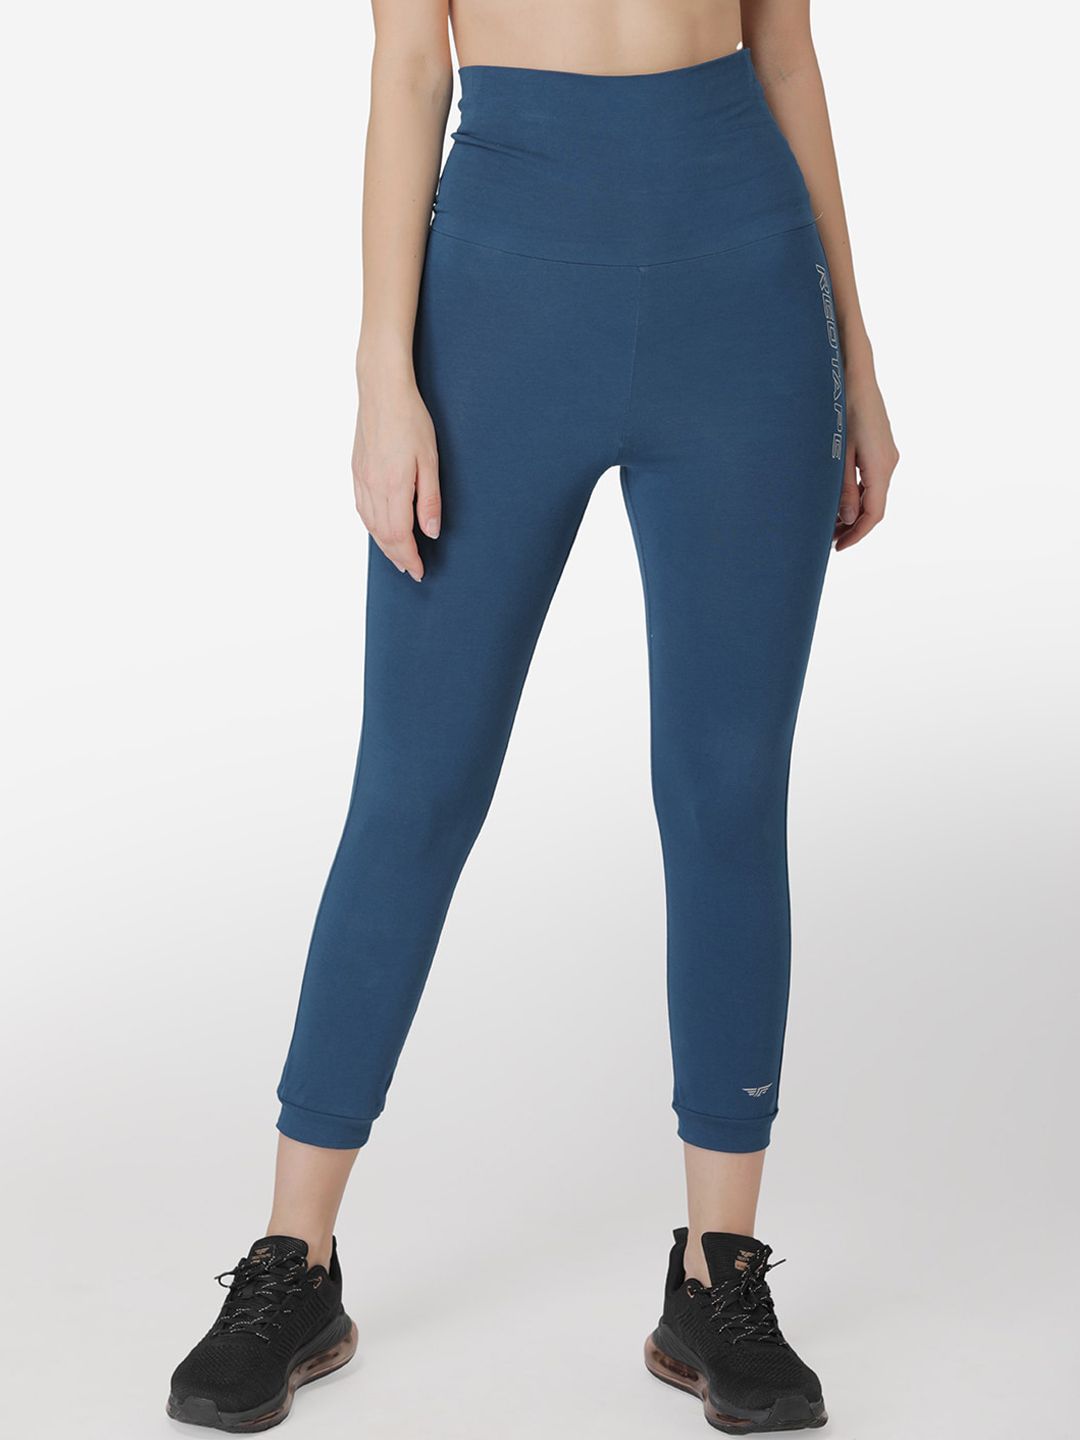 Red Tape Women Blue Solid Sports Tights Price in India